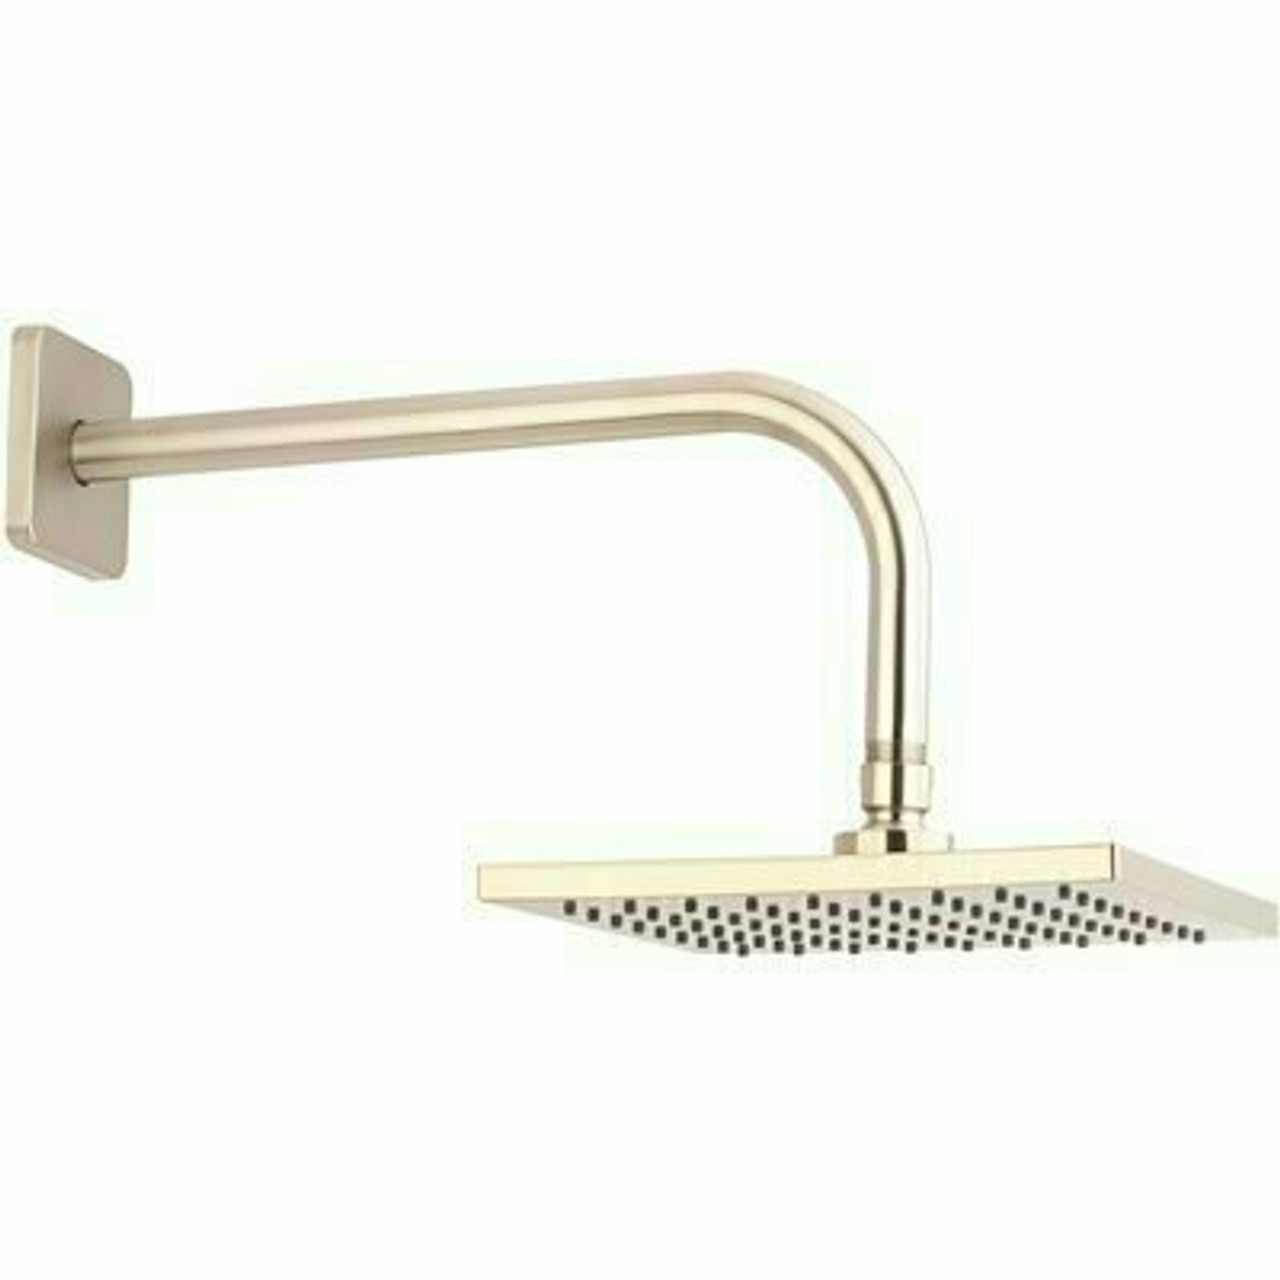 Premier 1-Spray 8 In. Single Tub Wall Mount Fixed Shower Head In Brushed Nickel